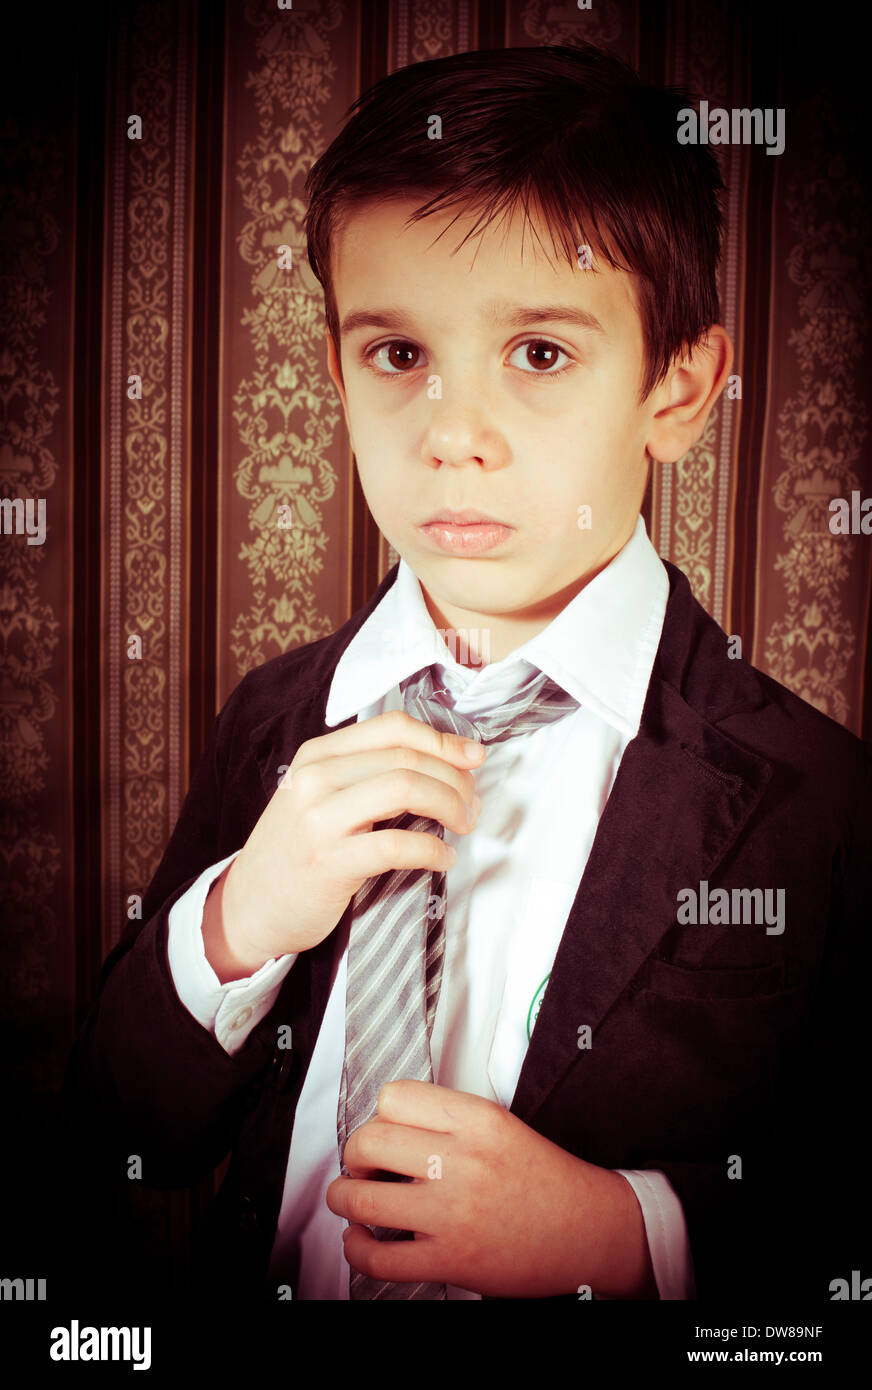 Boy in vintage black suit and tie Stock Photo